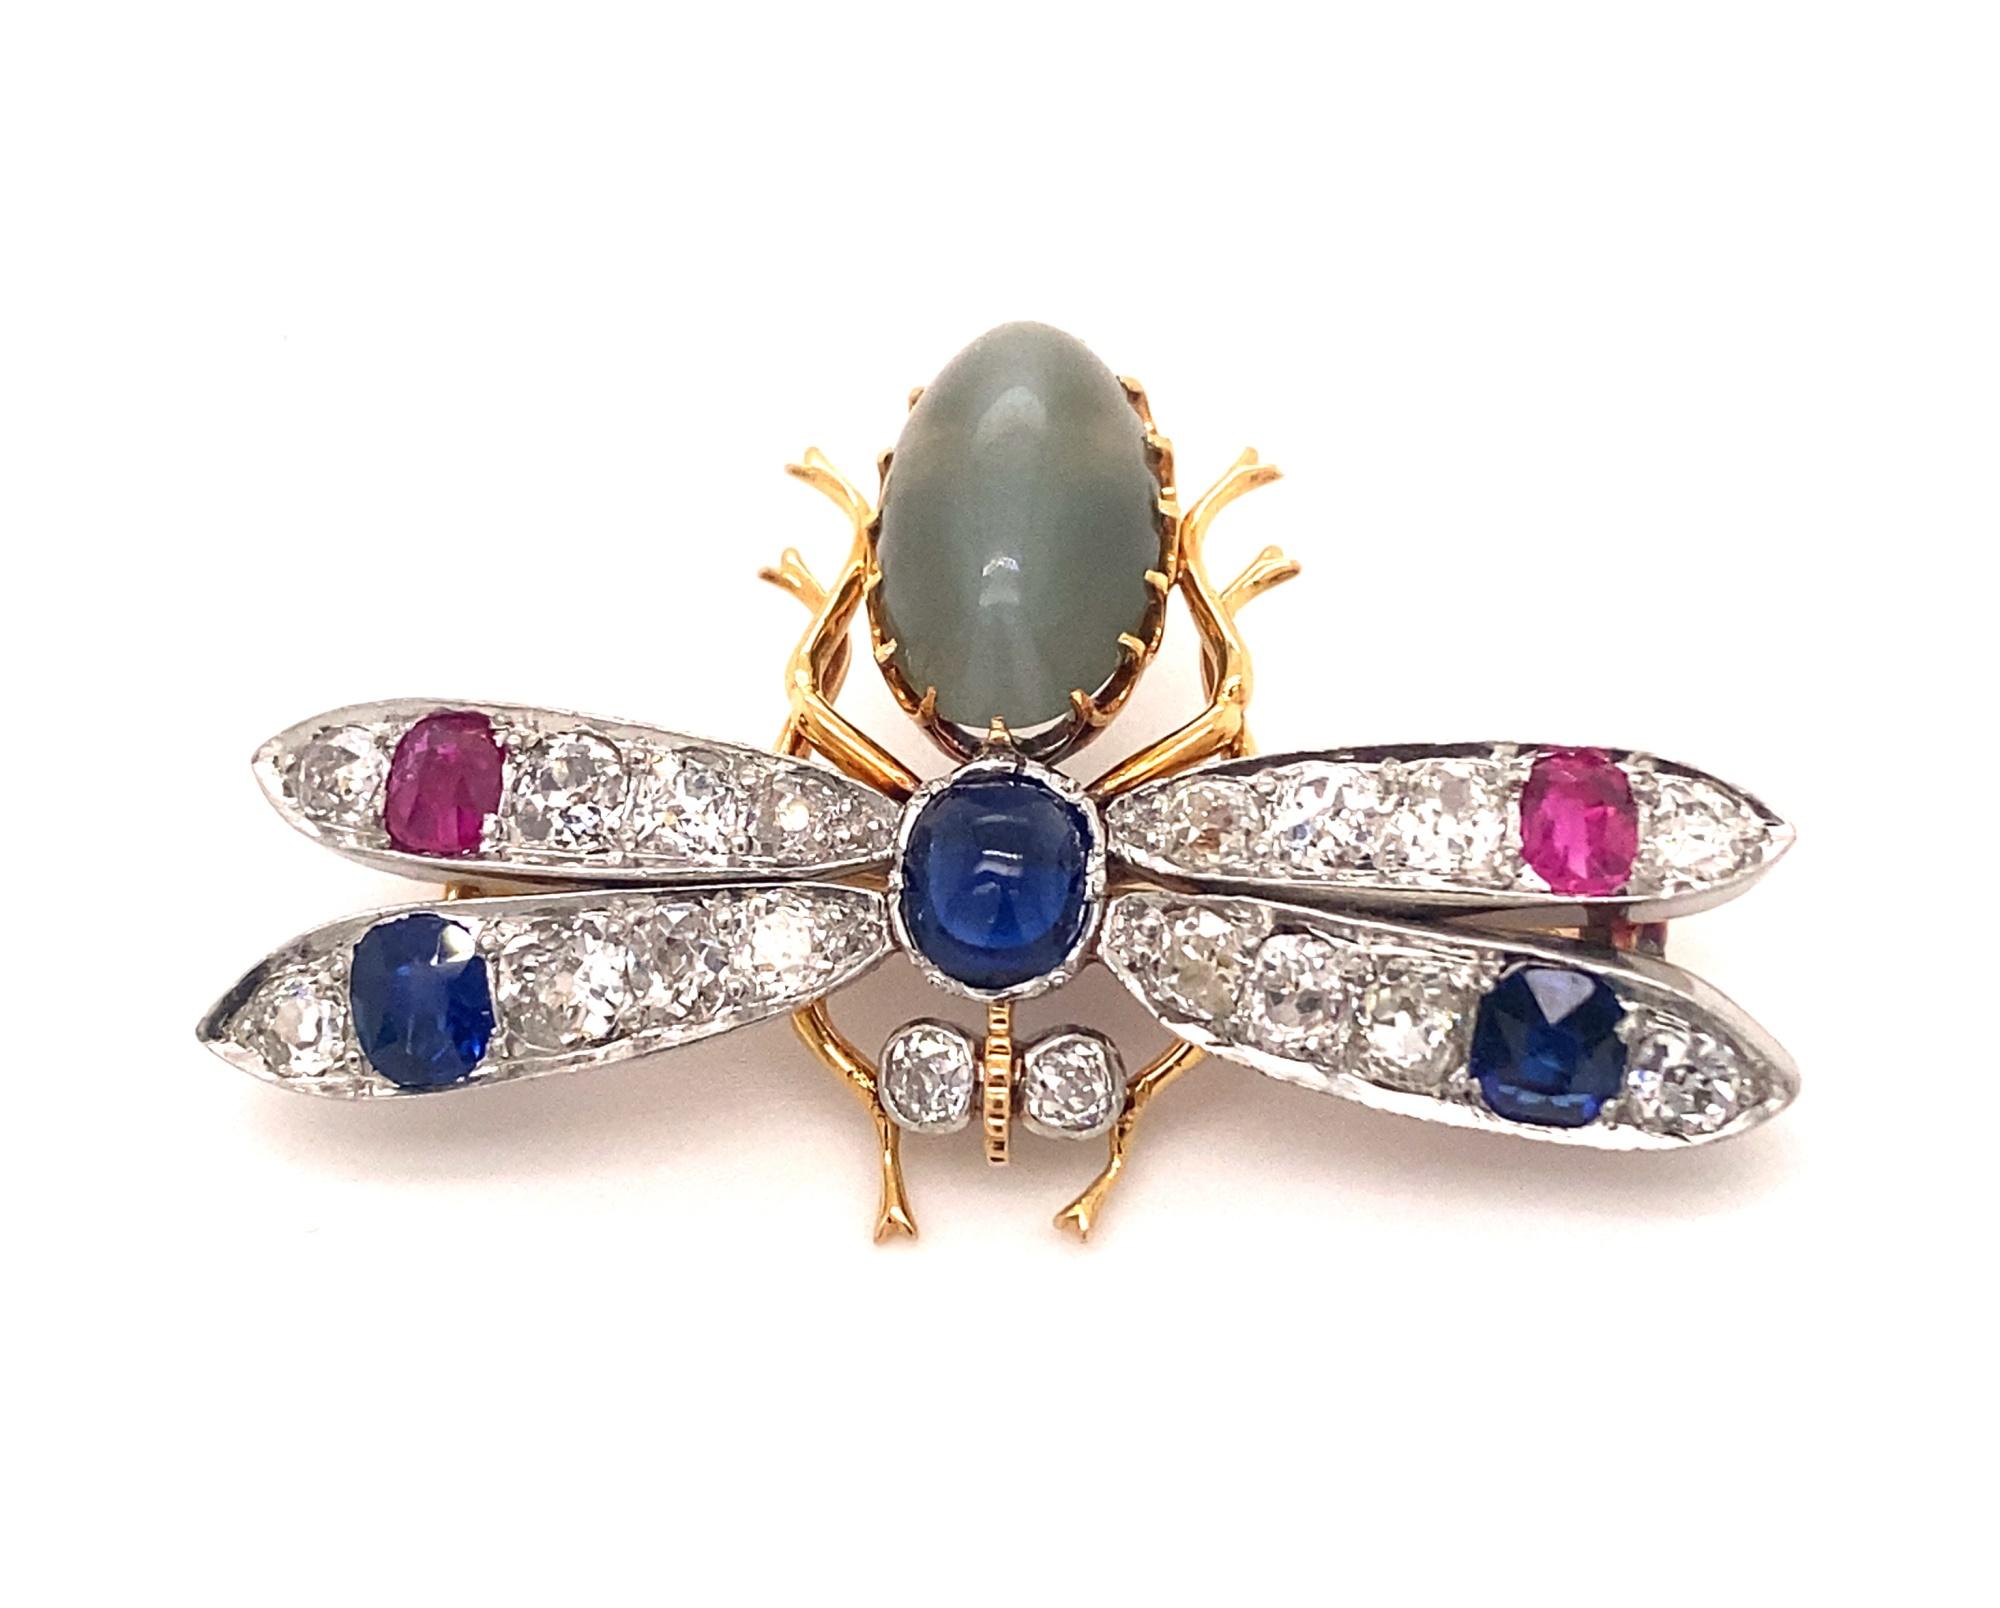 Antique 18K Gold Platinum Gem Cats Eye Diamonds Rubies Sapphires Insect Brooch In Excellent Condition For Sale In Woodland Hills, CA